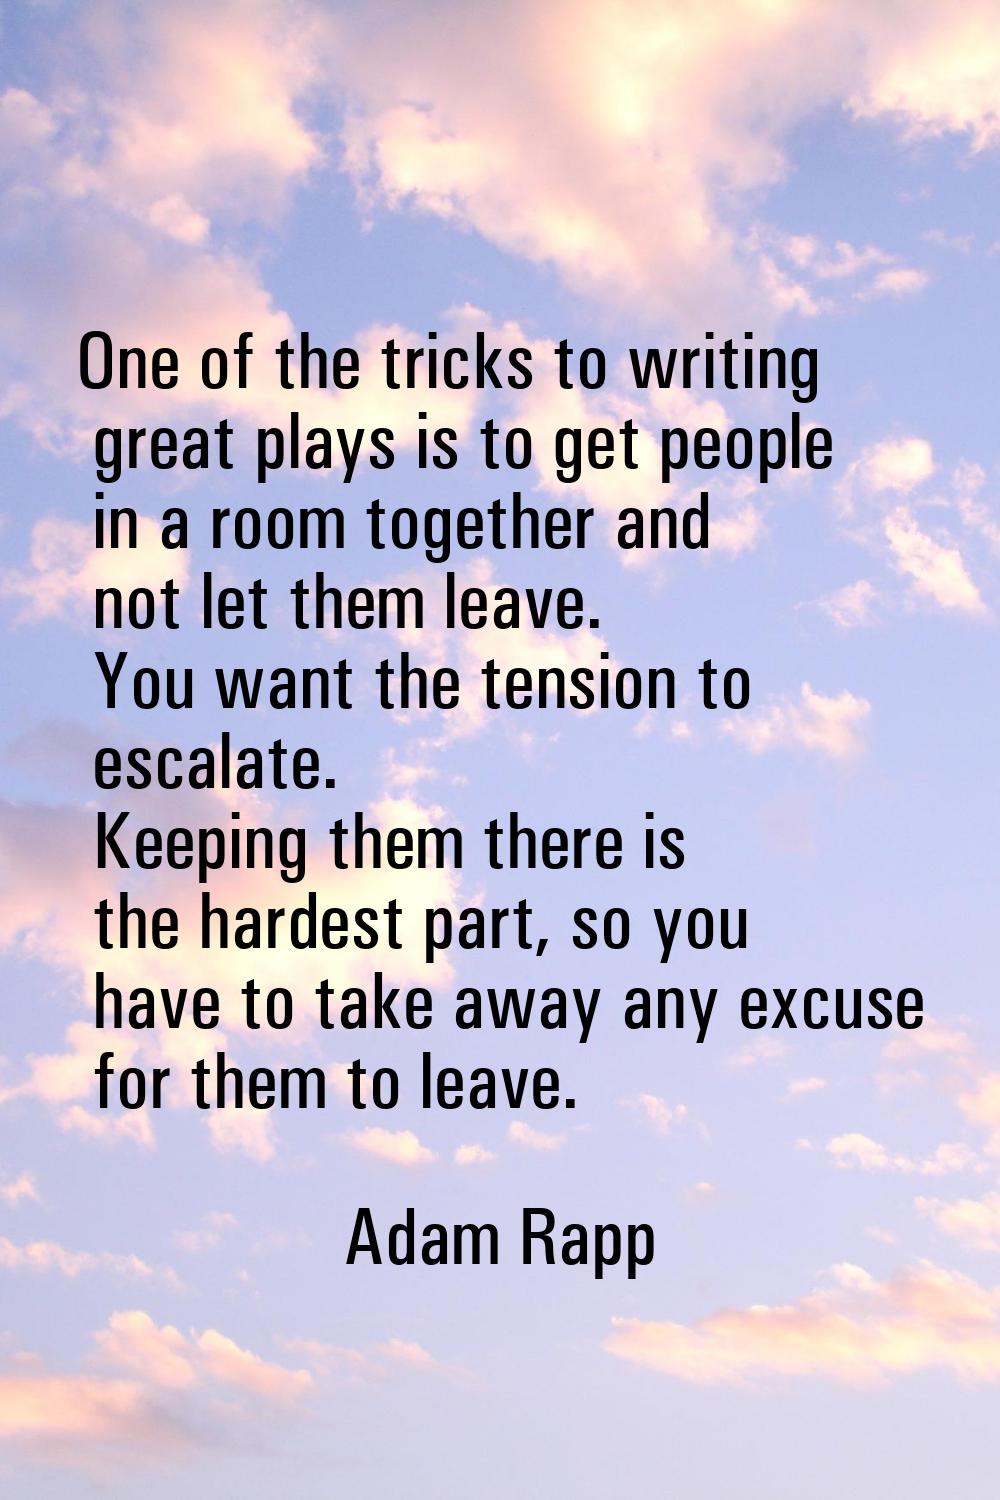 One of the tricks to writing great plays is to get people in a room together and not let them leave